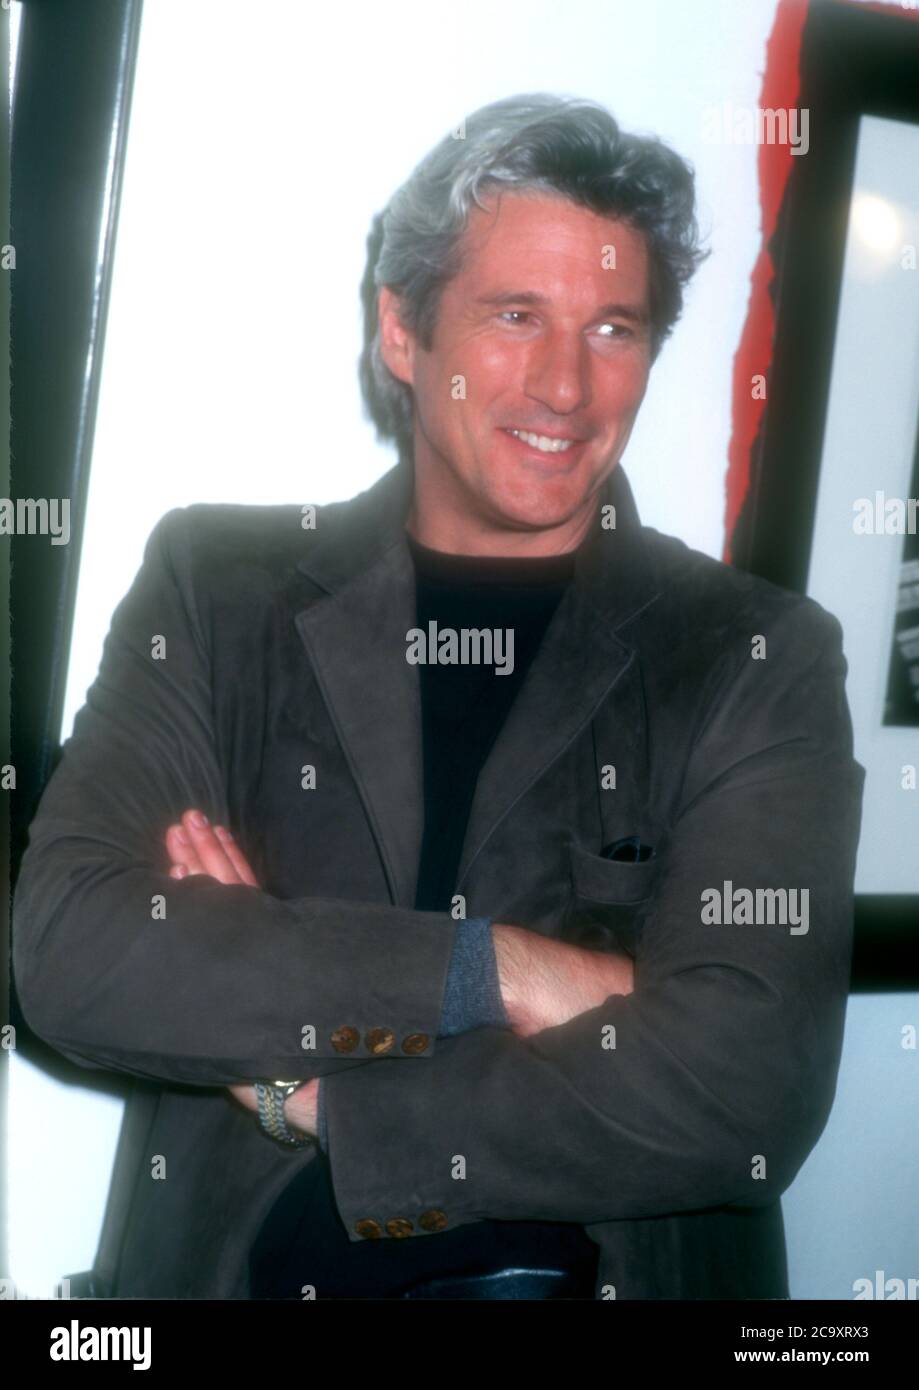 Los Angeles, California, USA 27th February 1996 Actor Richard Gere attends the exhibition of his photographs 'Zanskar and Tibet' on February 27, 1996 at the  Fahey/Klein Gallery in Los Angeles, California, USA. Photo by Barry King/Alamy Stock Photo Stock Photo